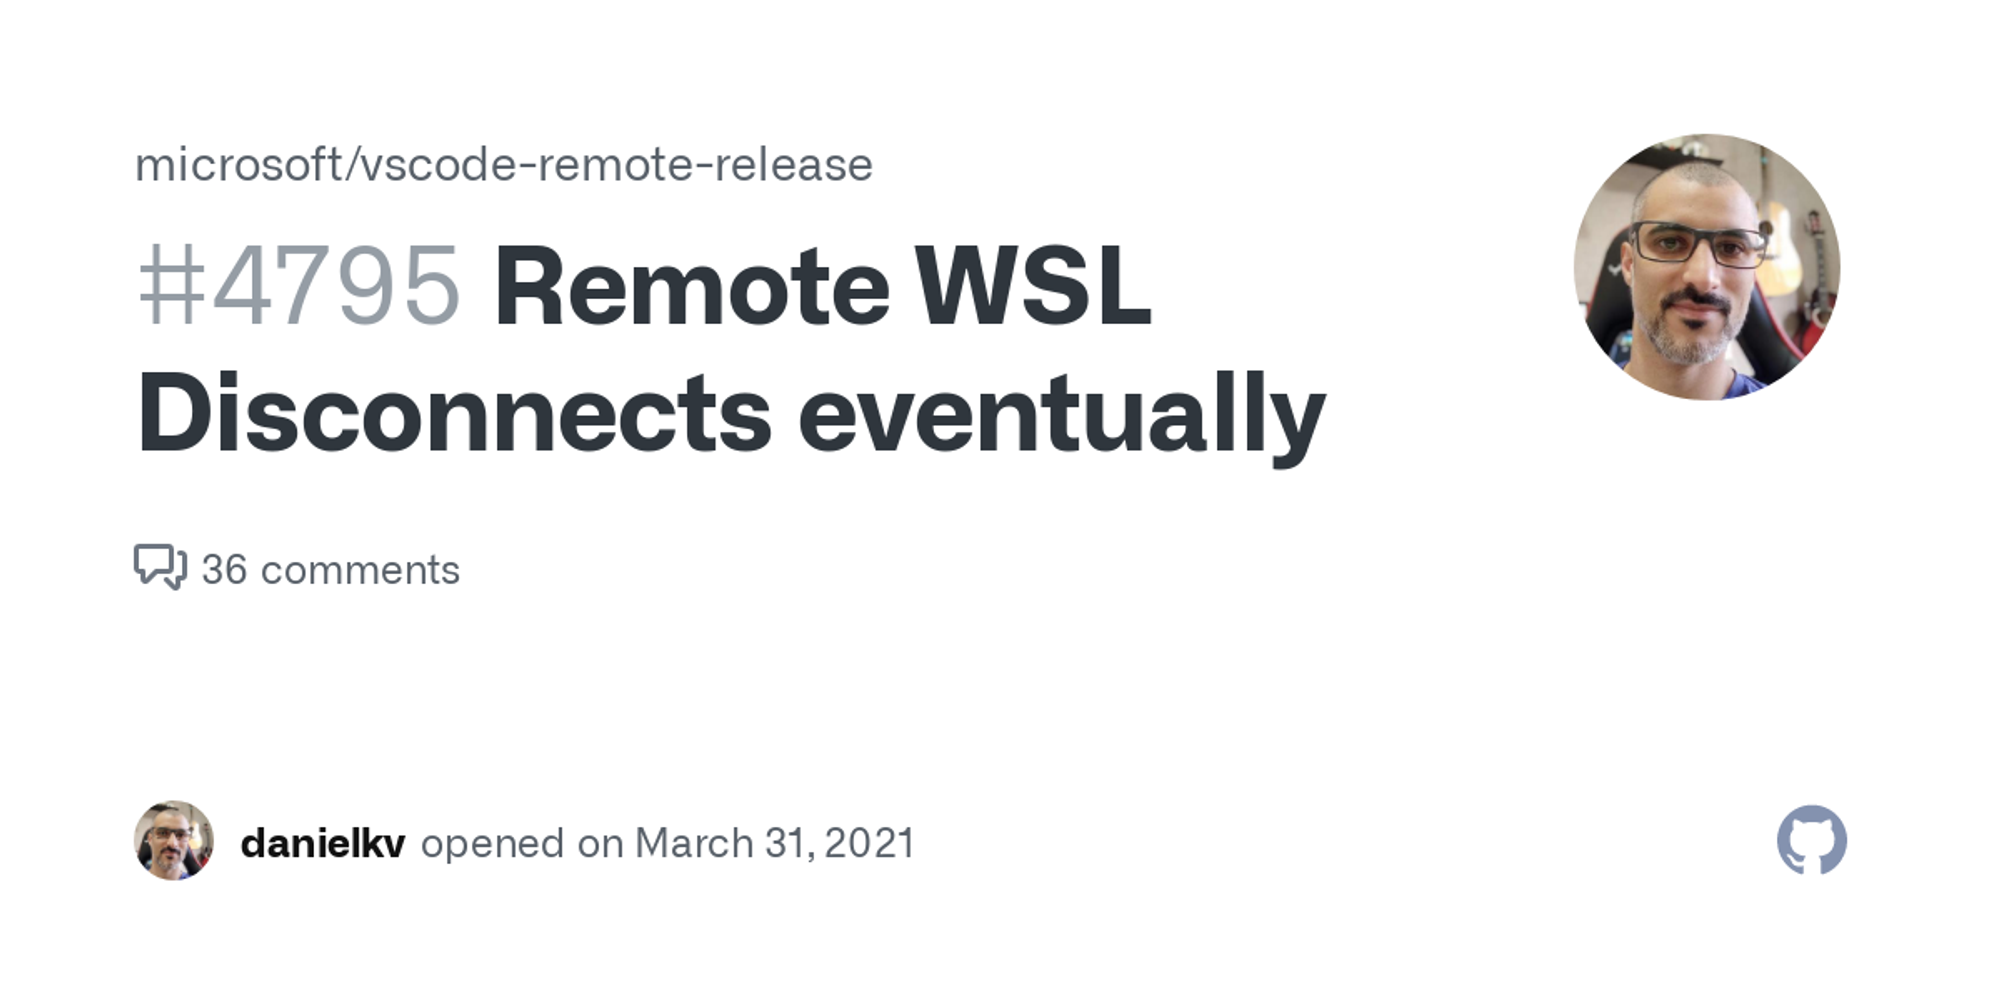 Remote WSL Disconnects eventually · Issue #4795 · microsoft/vscode-remote-release